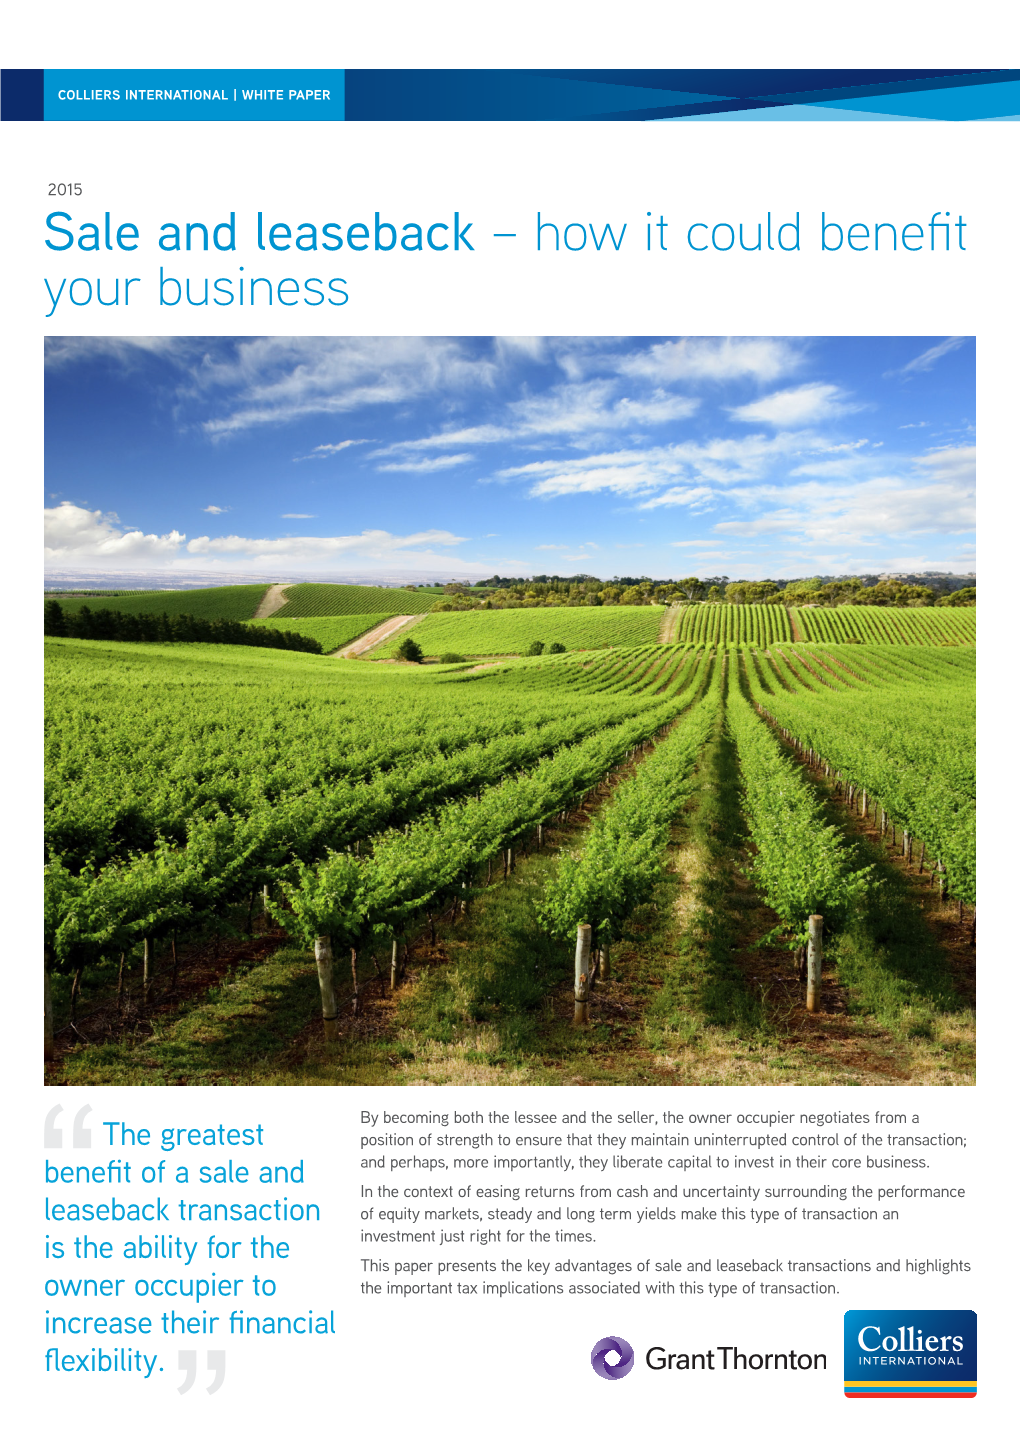 Sale and Leaseback – How It Could Benefit Your Business